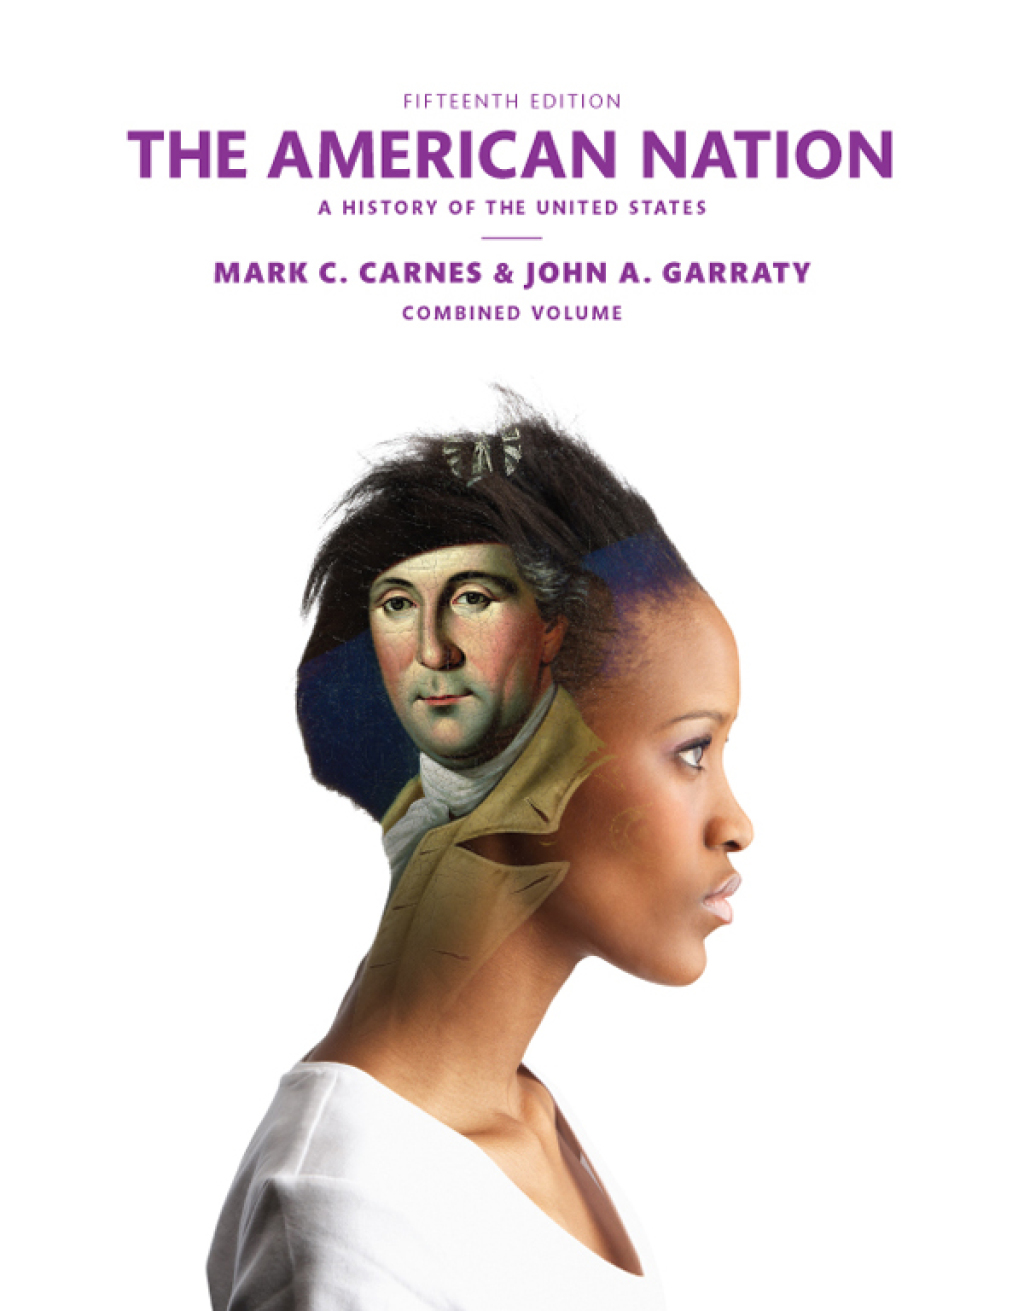 The American Nation - 15th Edition (eBook)